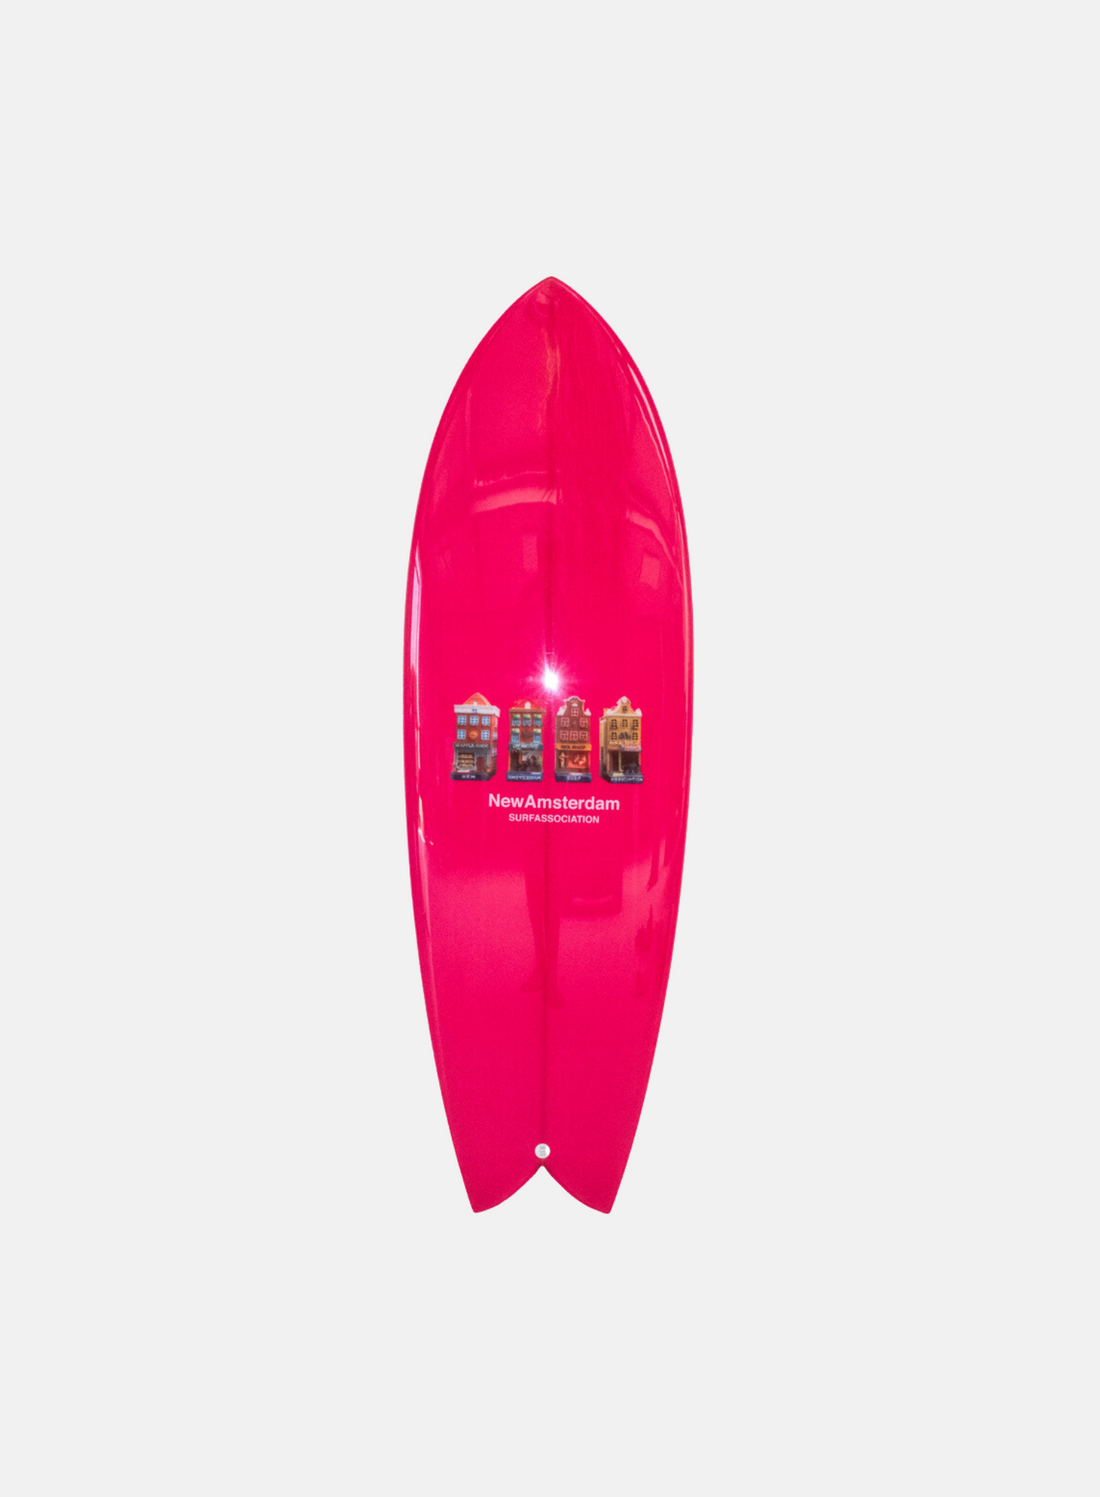 New Amsterdam Surf Association Houses Surfboard - Hympala Store 